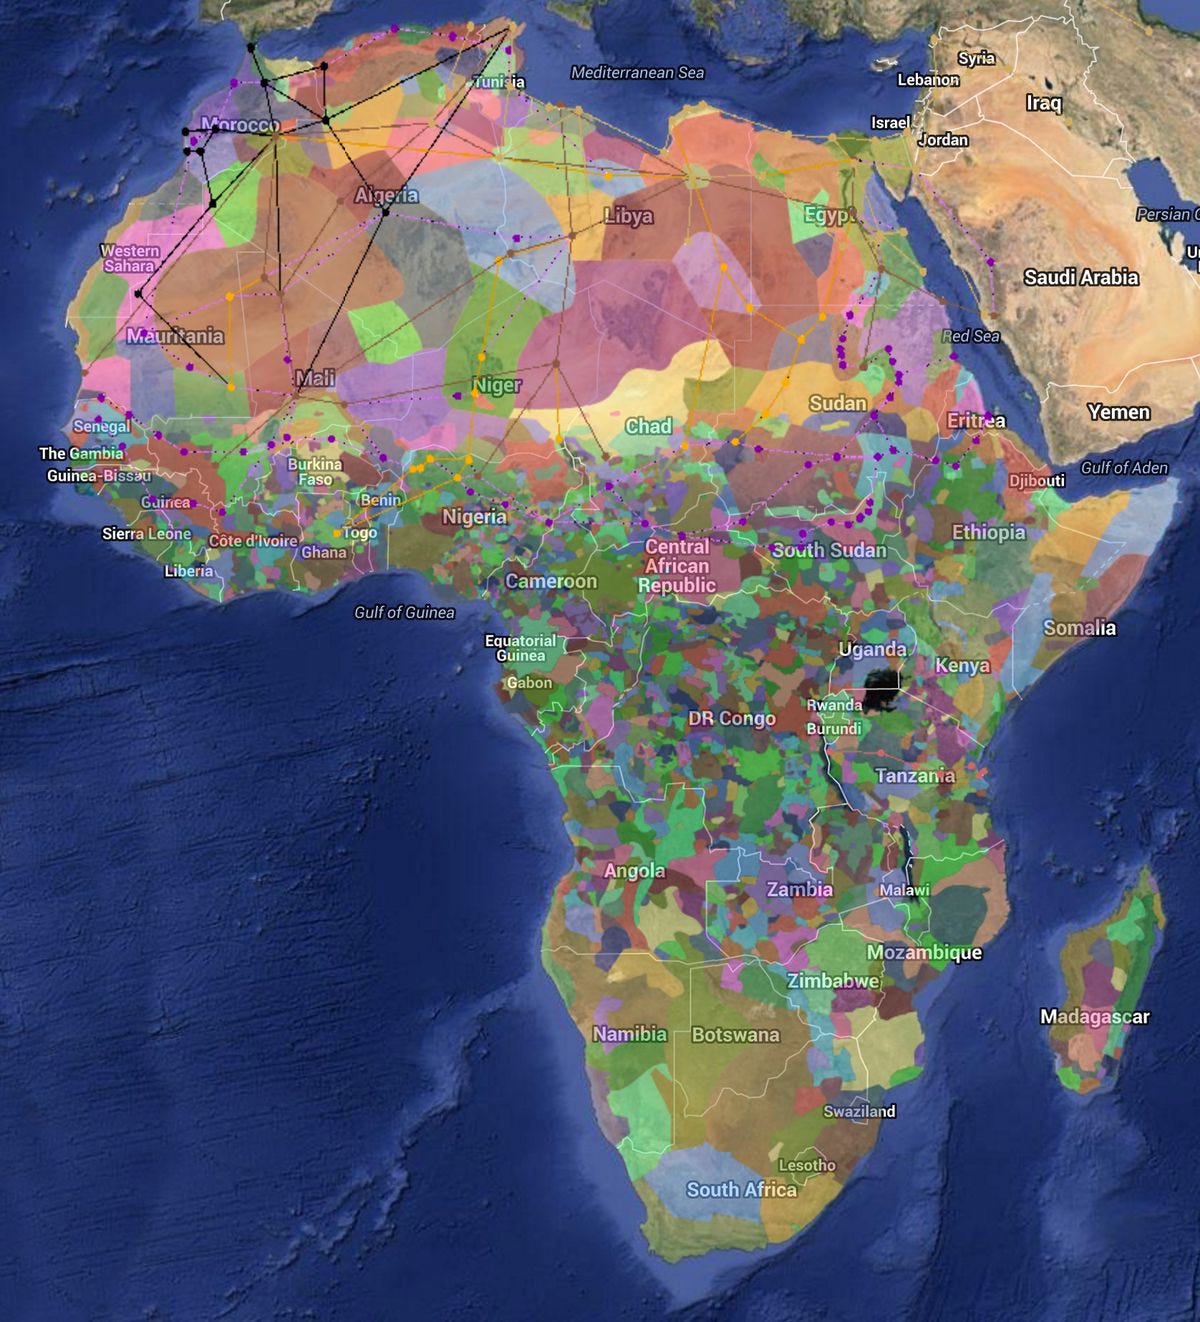 A color-coded map of Africa's Ethnic diversity